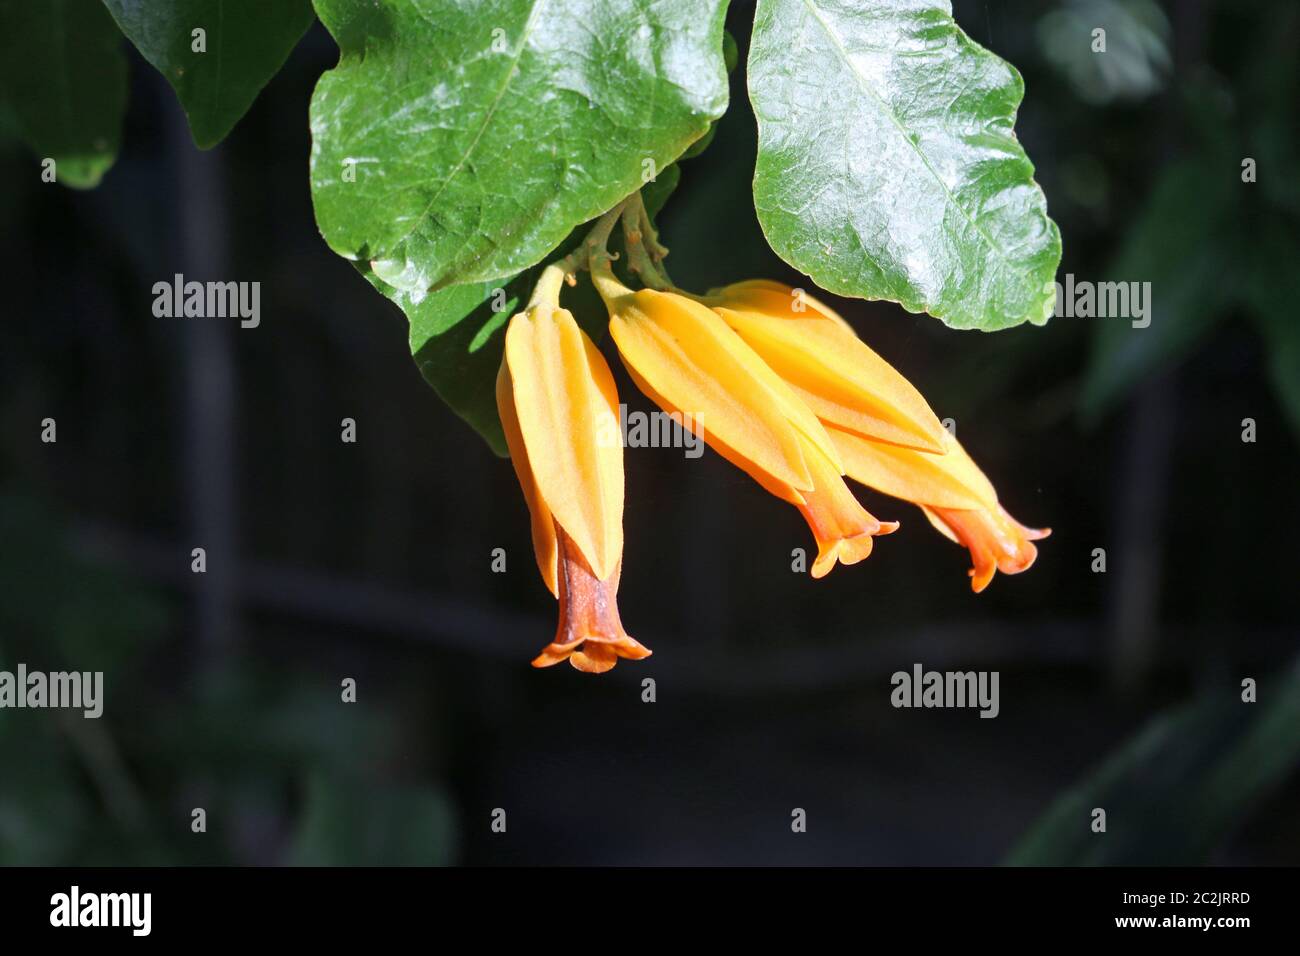 Gold finger plant, Juanulloa mexicana, yellow flowers with two leaves and a dark blurred background. Stock Photo